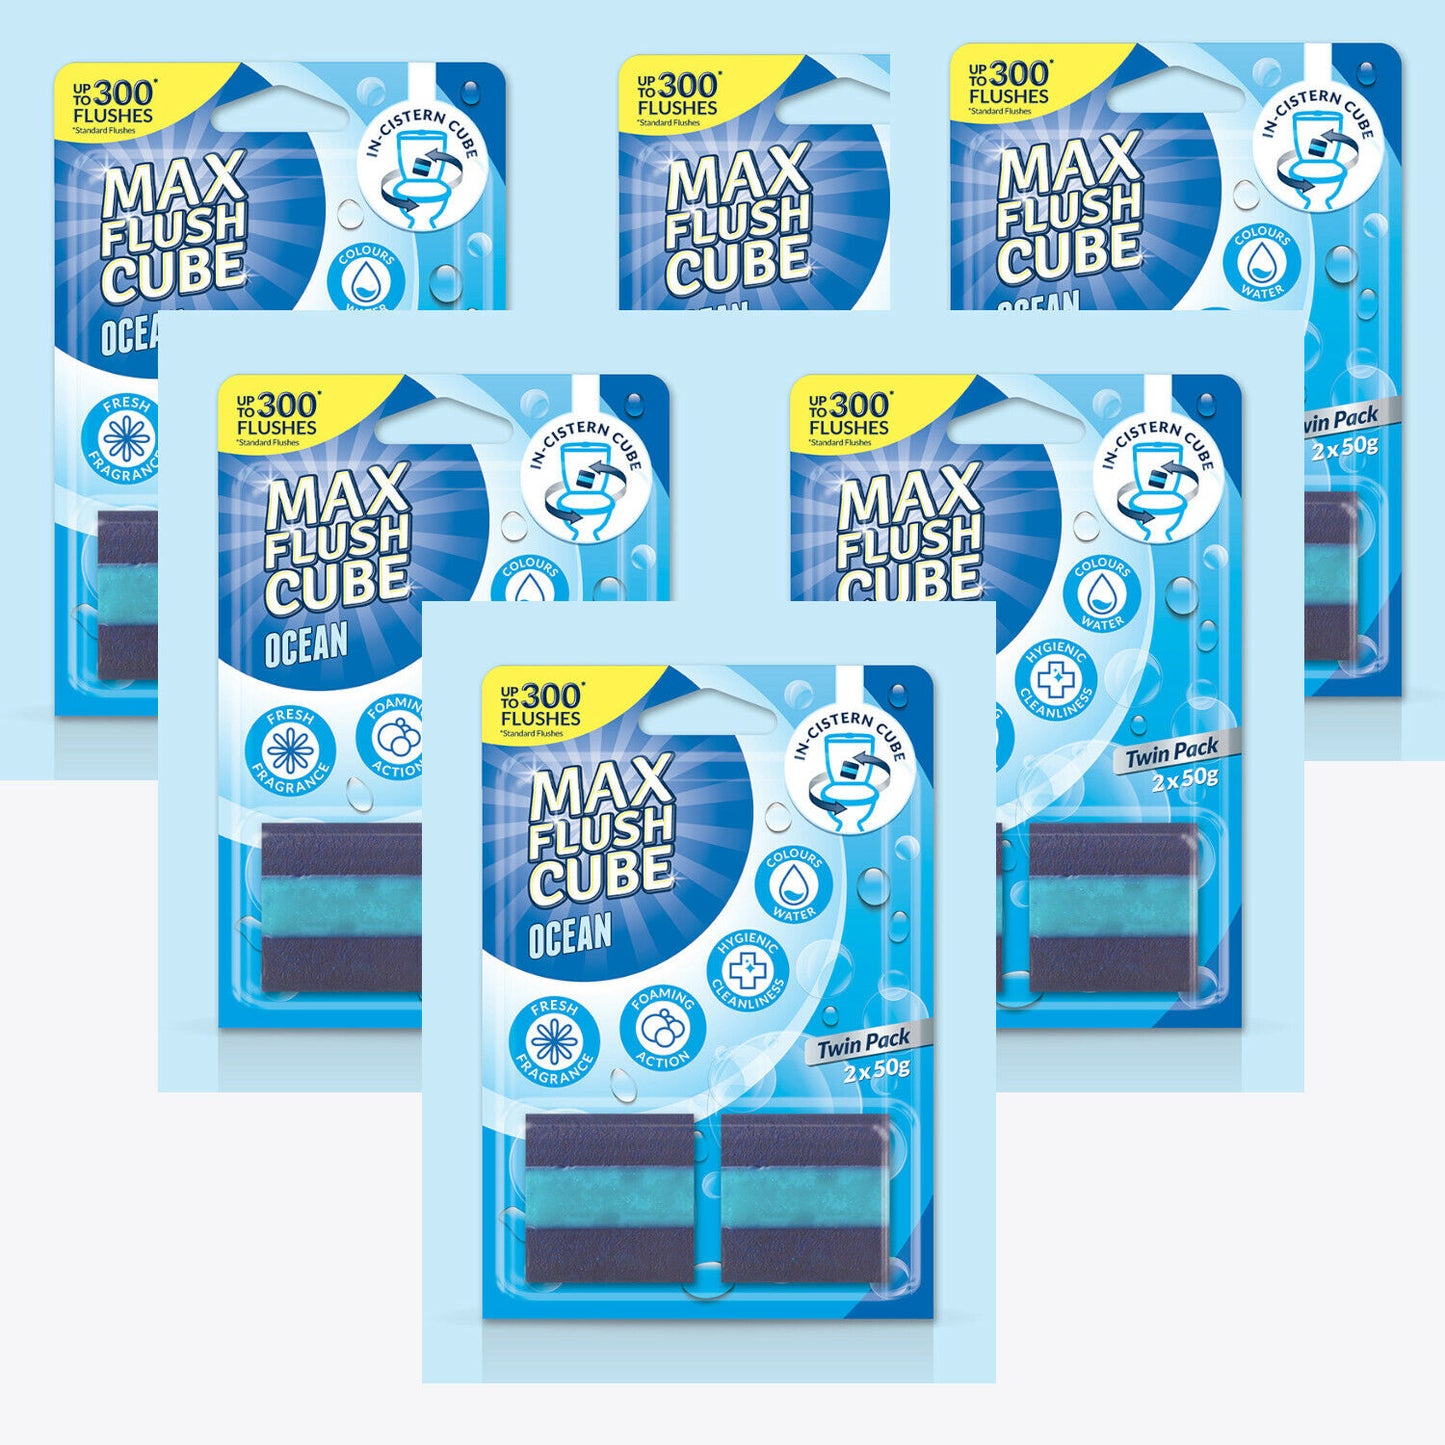 6x Max Flush Cube Ocean In-Cistern Cube Toilet Cleaner (Twin Pack 2x 50g)